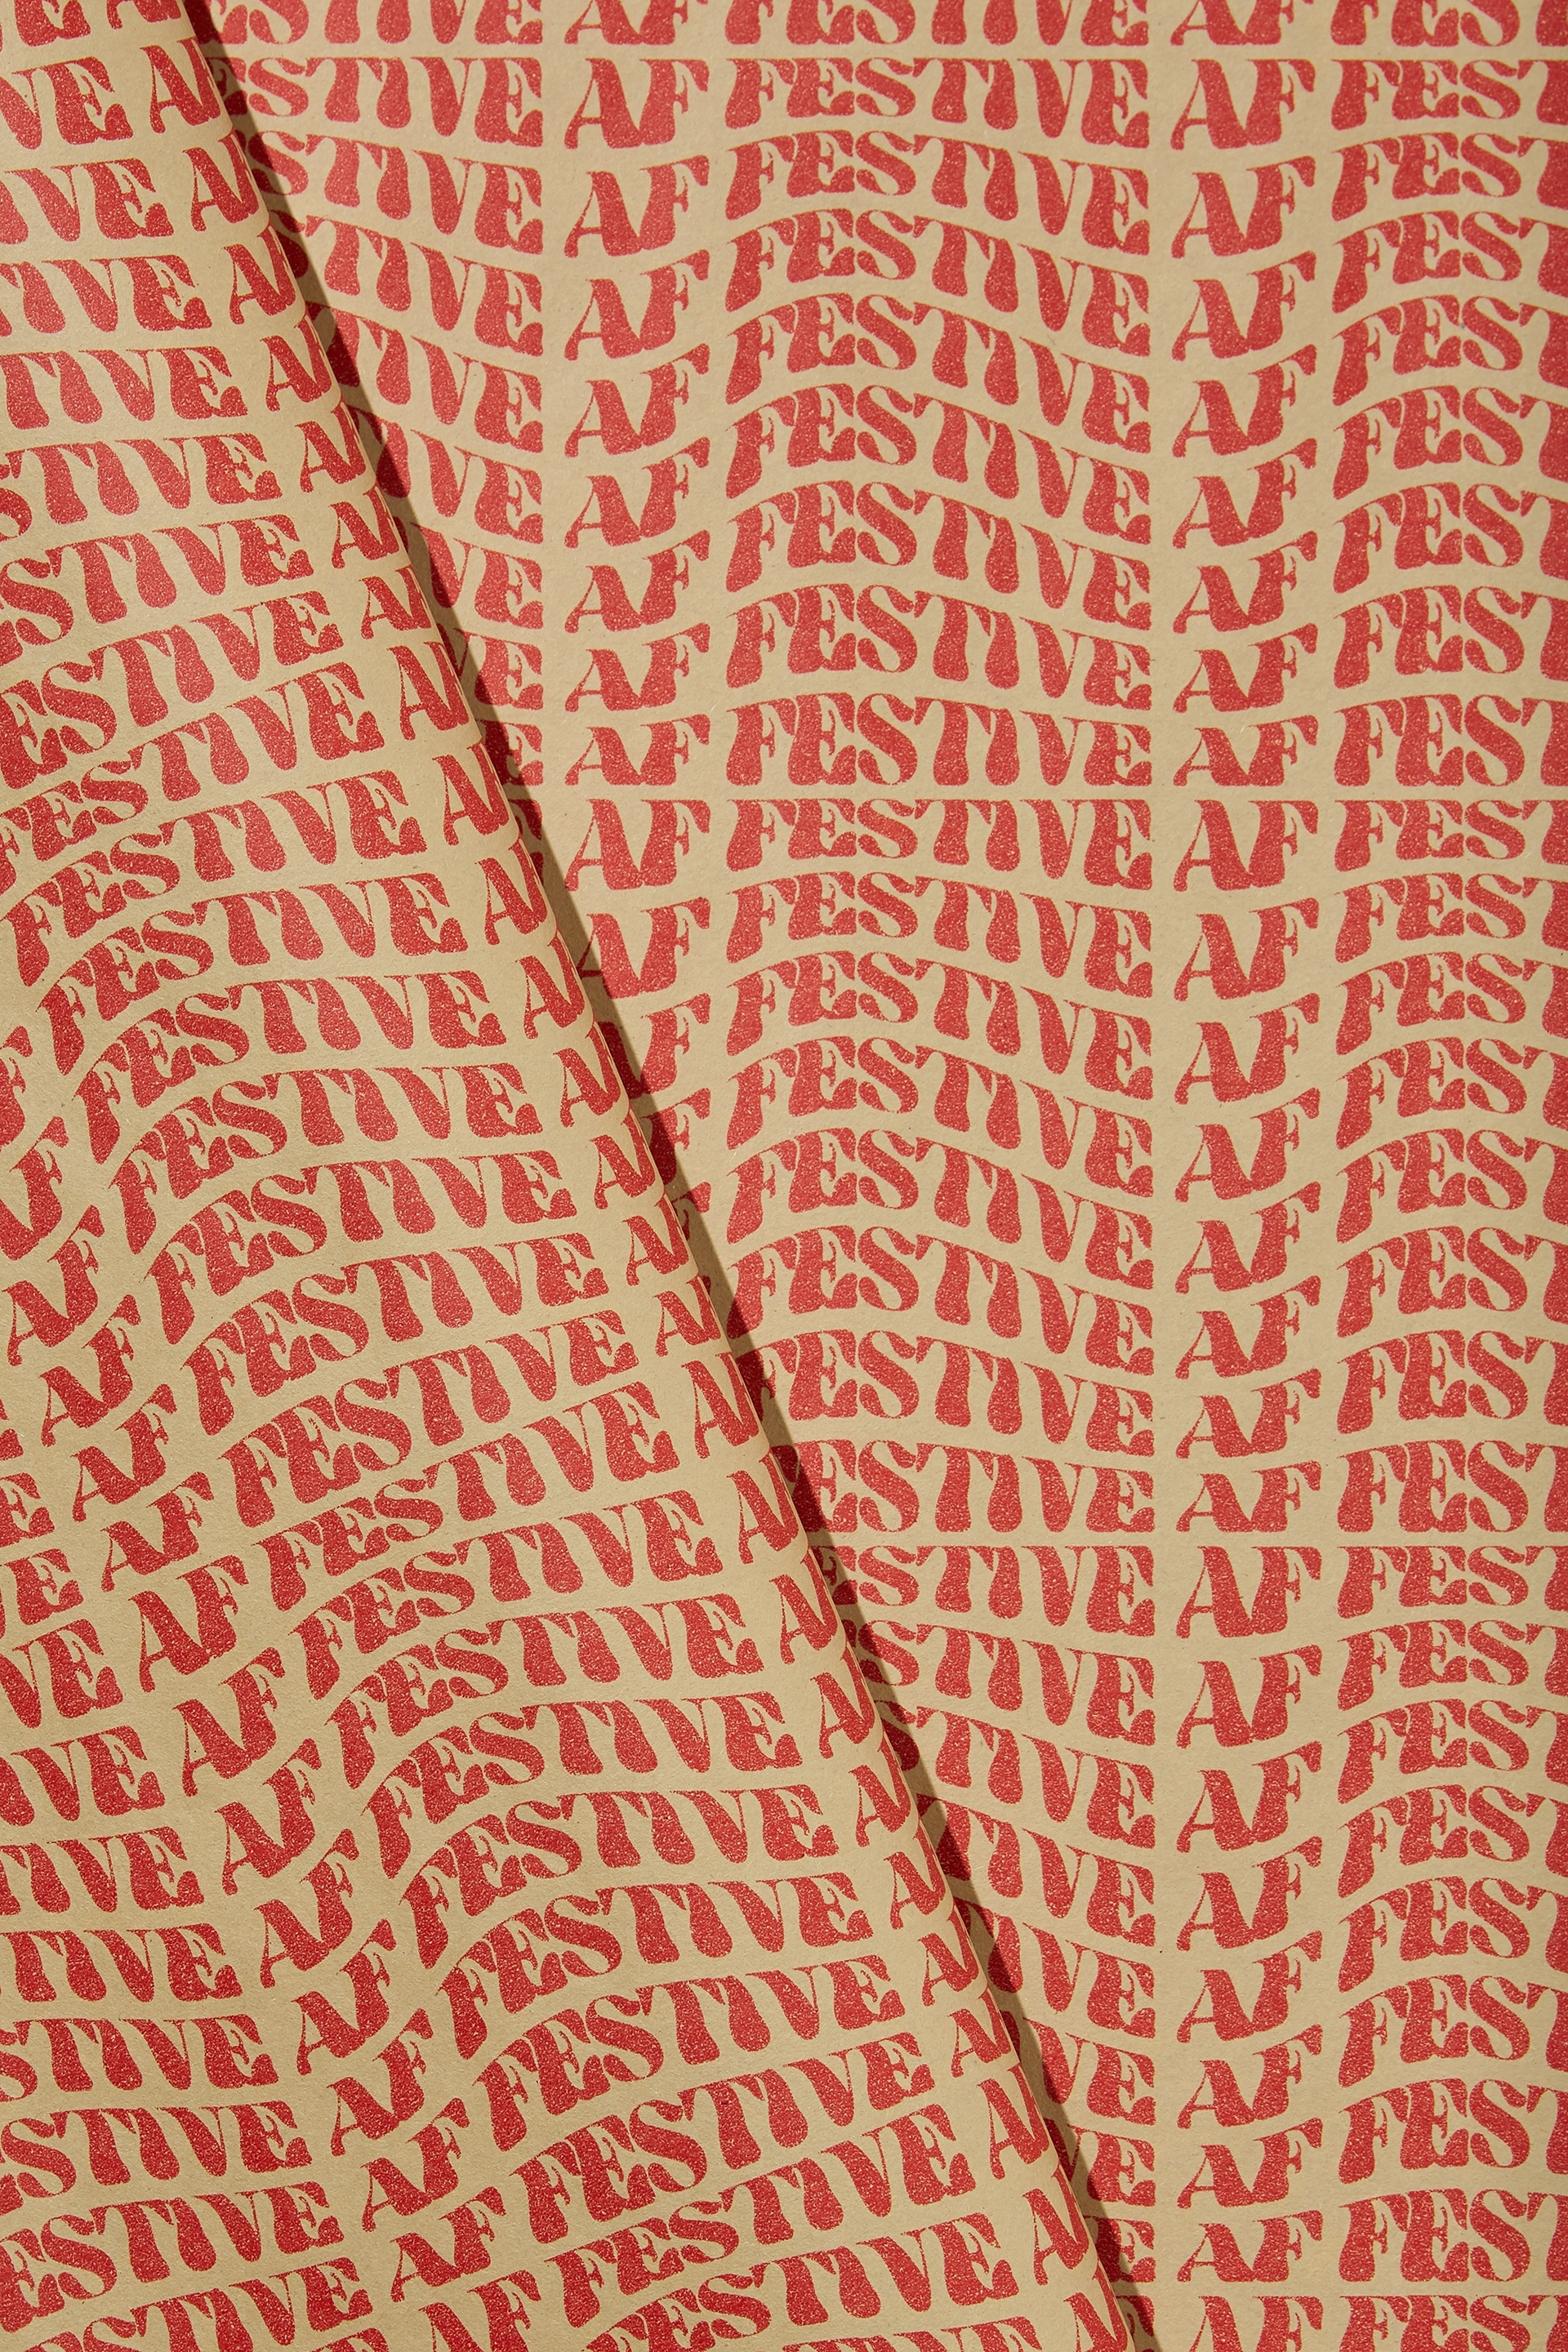 Typo - Wrapping Paper Roll - Festive af red kraft!